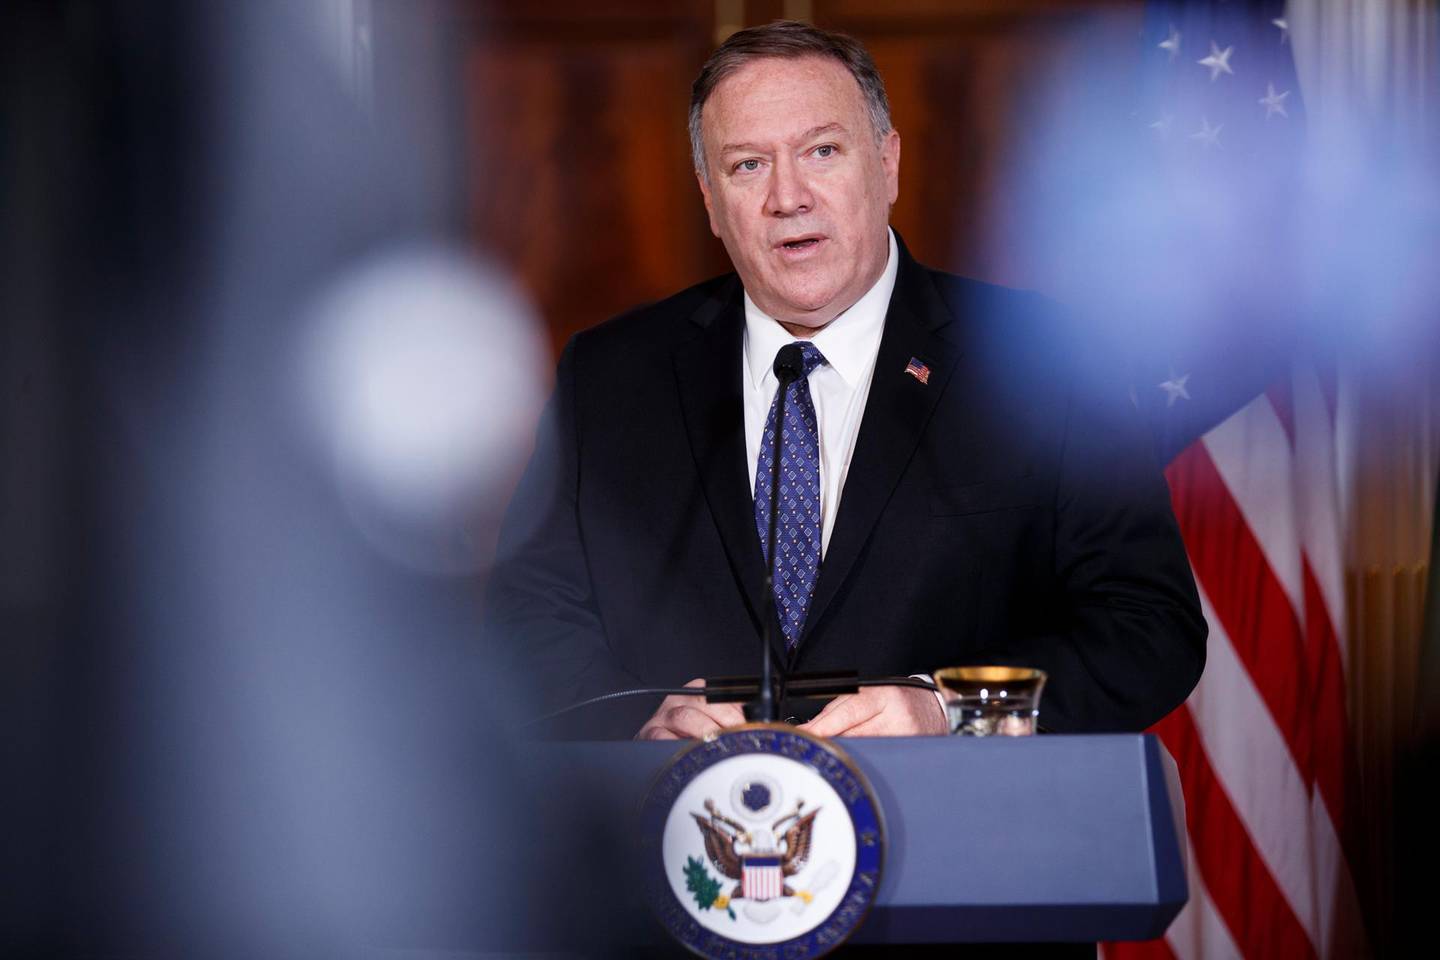 epa07775339 US Secretary of State Mike Pompeo delivers remarks during a briefing at the State Department in Washington, DC, USA, 15 August 2019. The remarks came following a meeting with Lebanese Prime Minister Saad Hariri who is negotiating to secure continued US support to Lebanon while holding back sanctions on Hezbollah and its allies.  EPA/SHAWN THEW